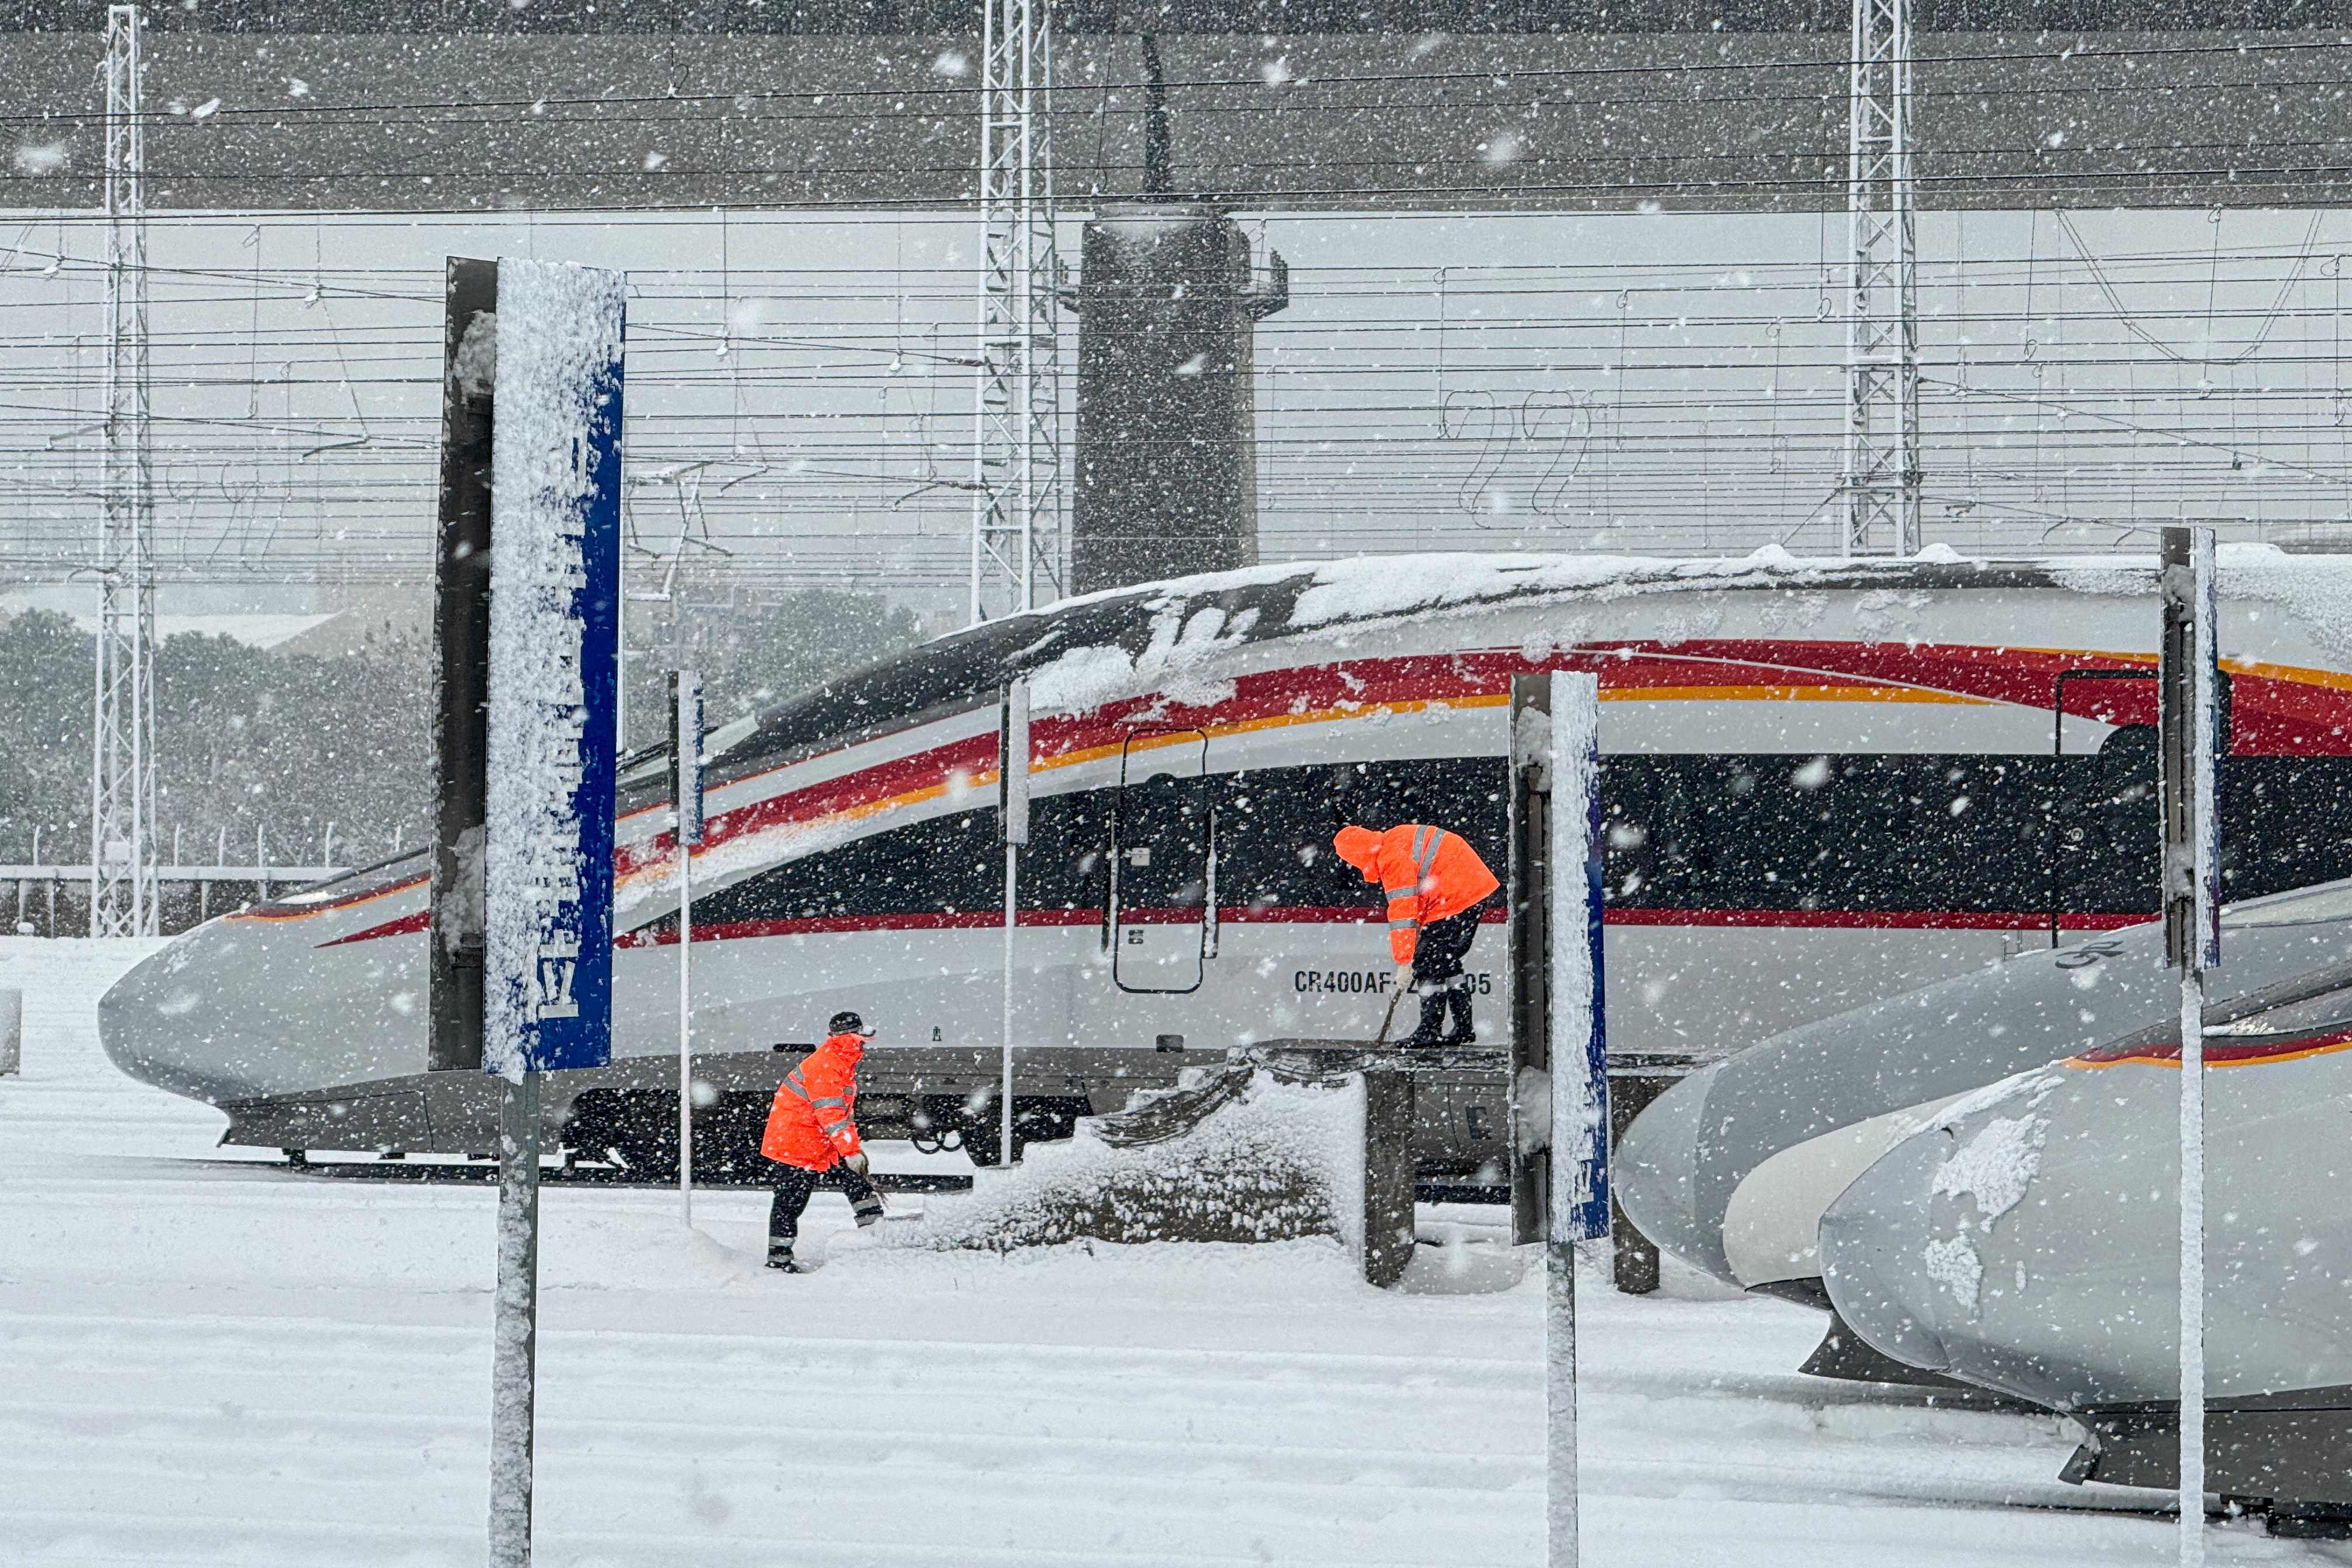 Railway workers clear snow from a bullet train in Nanchang in central China’s Jiangxi province on January 22. Chinese travellers are expected to make a record 9 billion trips during this year’s Lunar New Year holiday. Photo: AFP